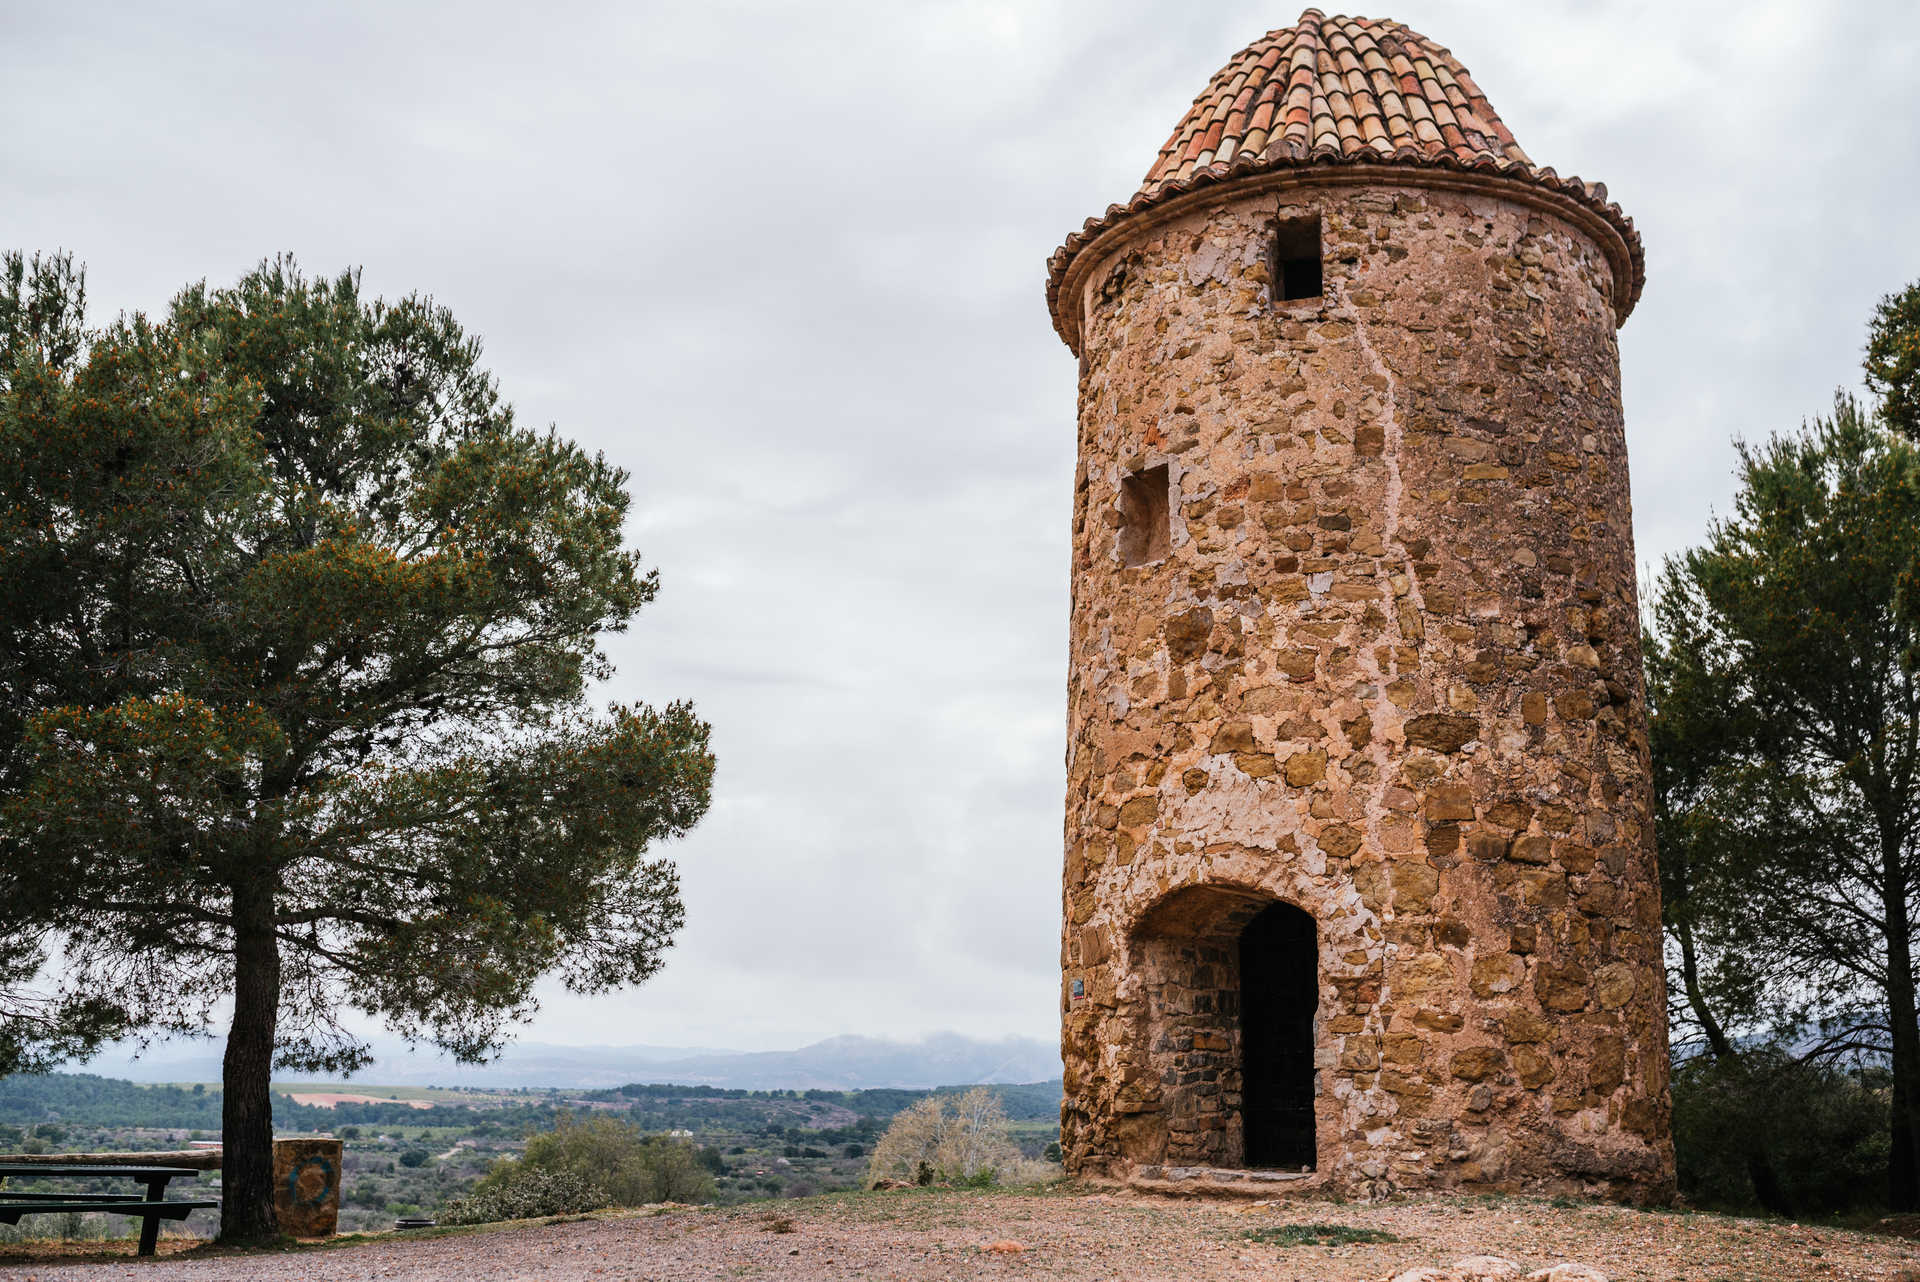 The Mill Tower or Anibal Tower